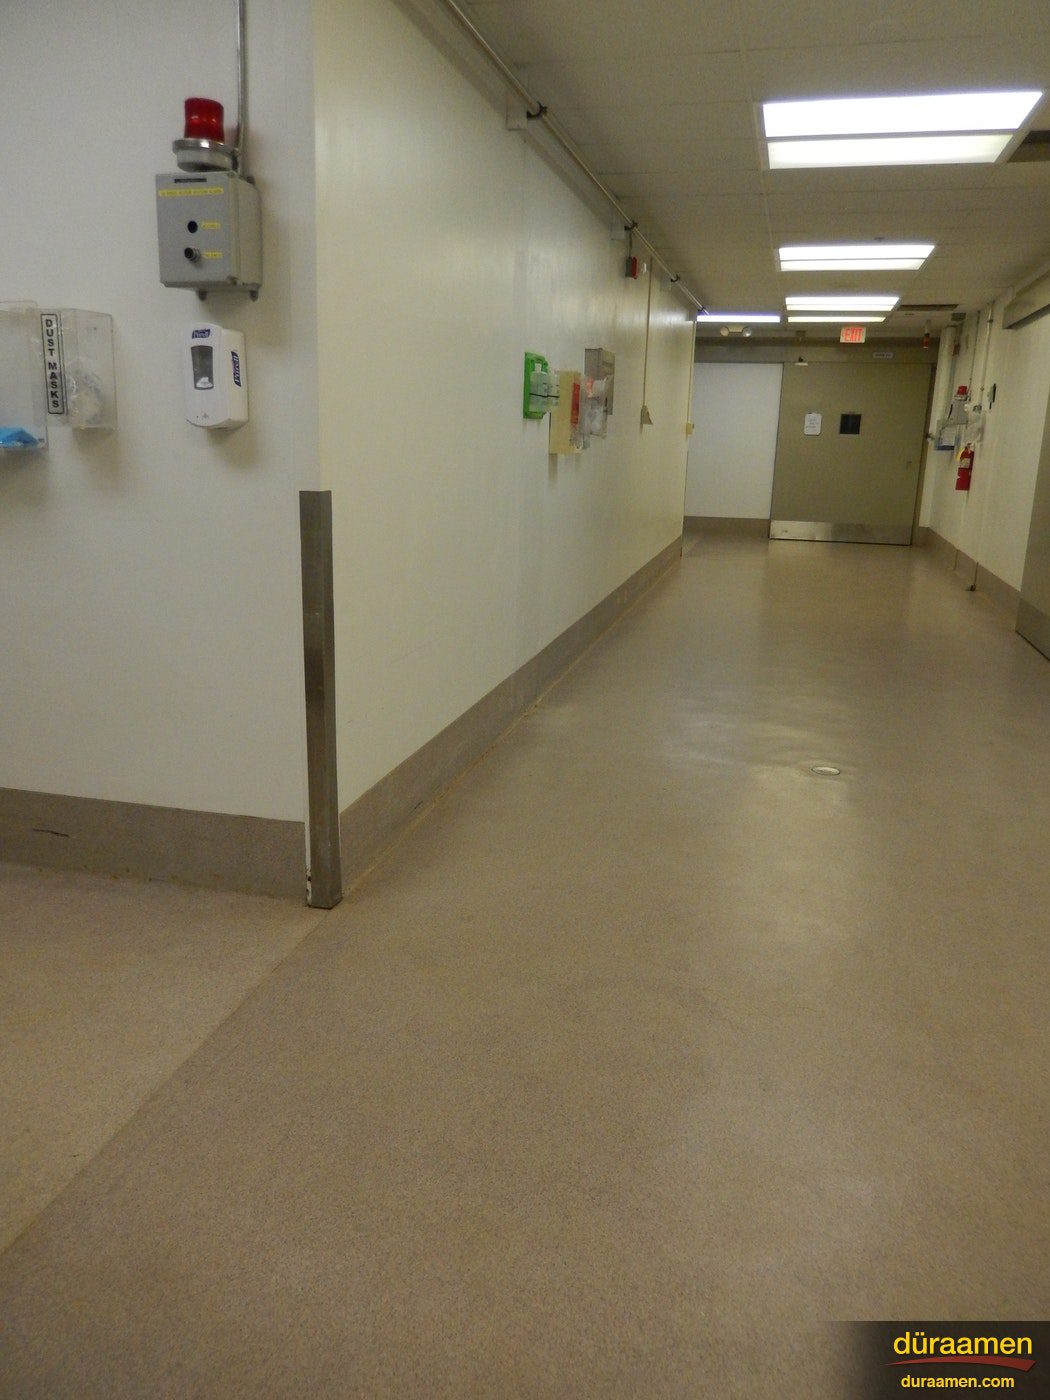 Kwortz Decorative quartz flooring system was installed in Novel Industries Pharmaceutical plant located in Caldwell NJ Double broadcast Colored Quartz Flooring in Pharmaceutical | Duraamen Engineered Products Inc